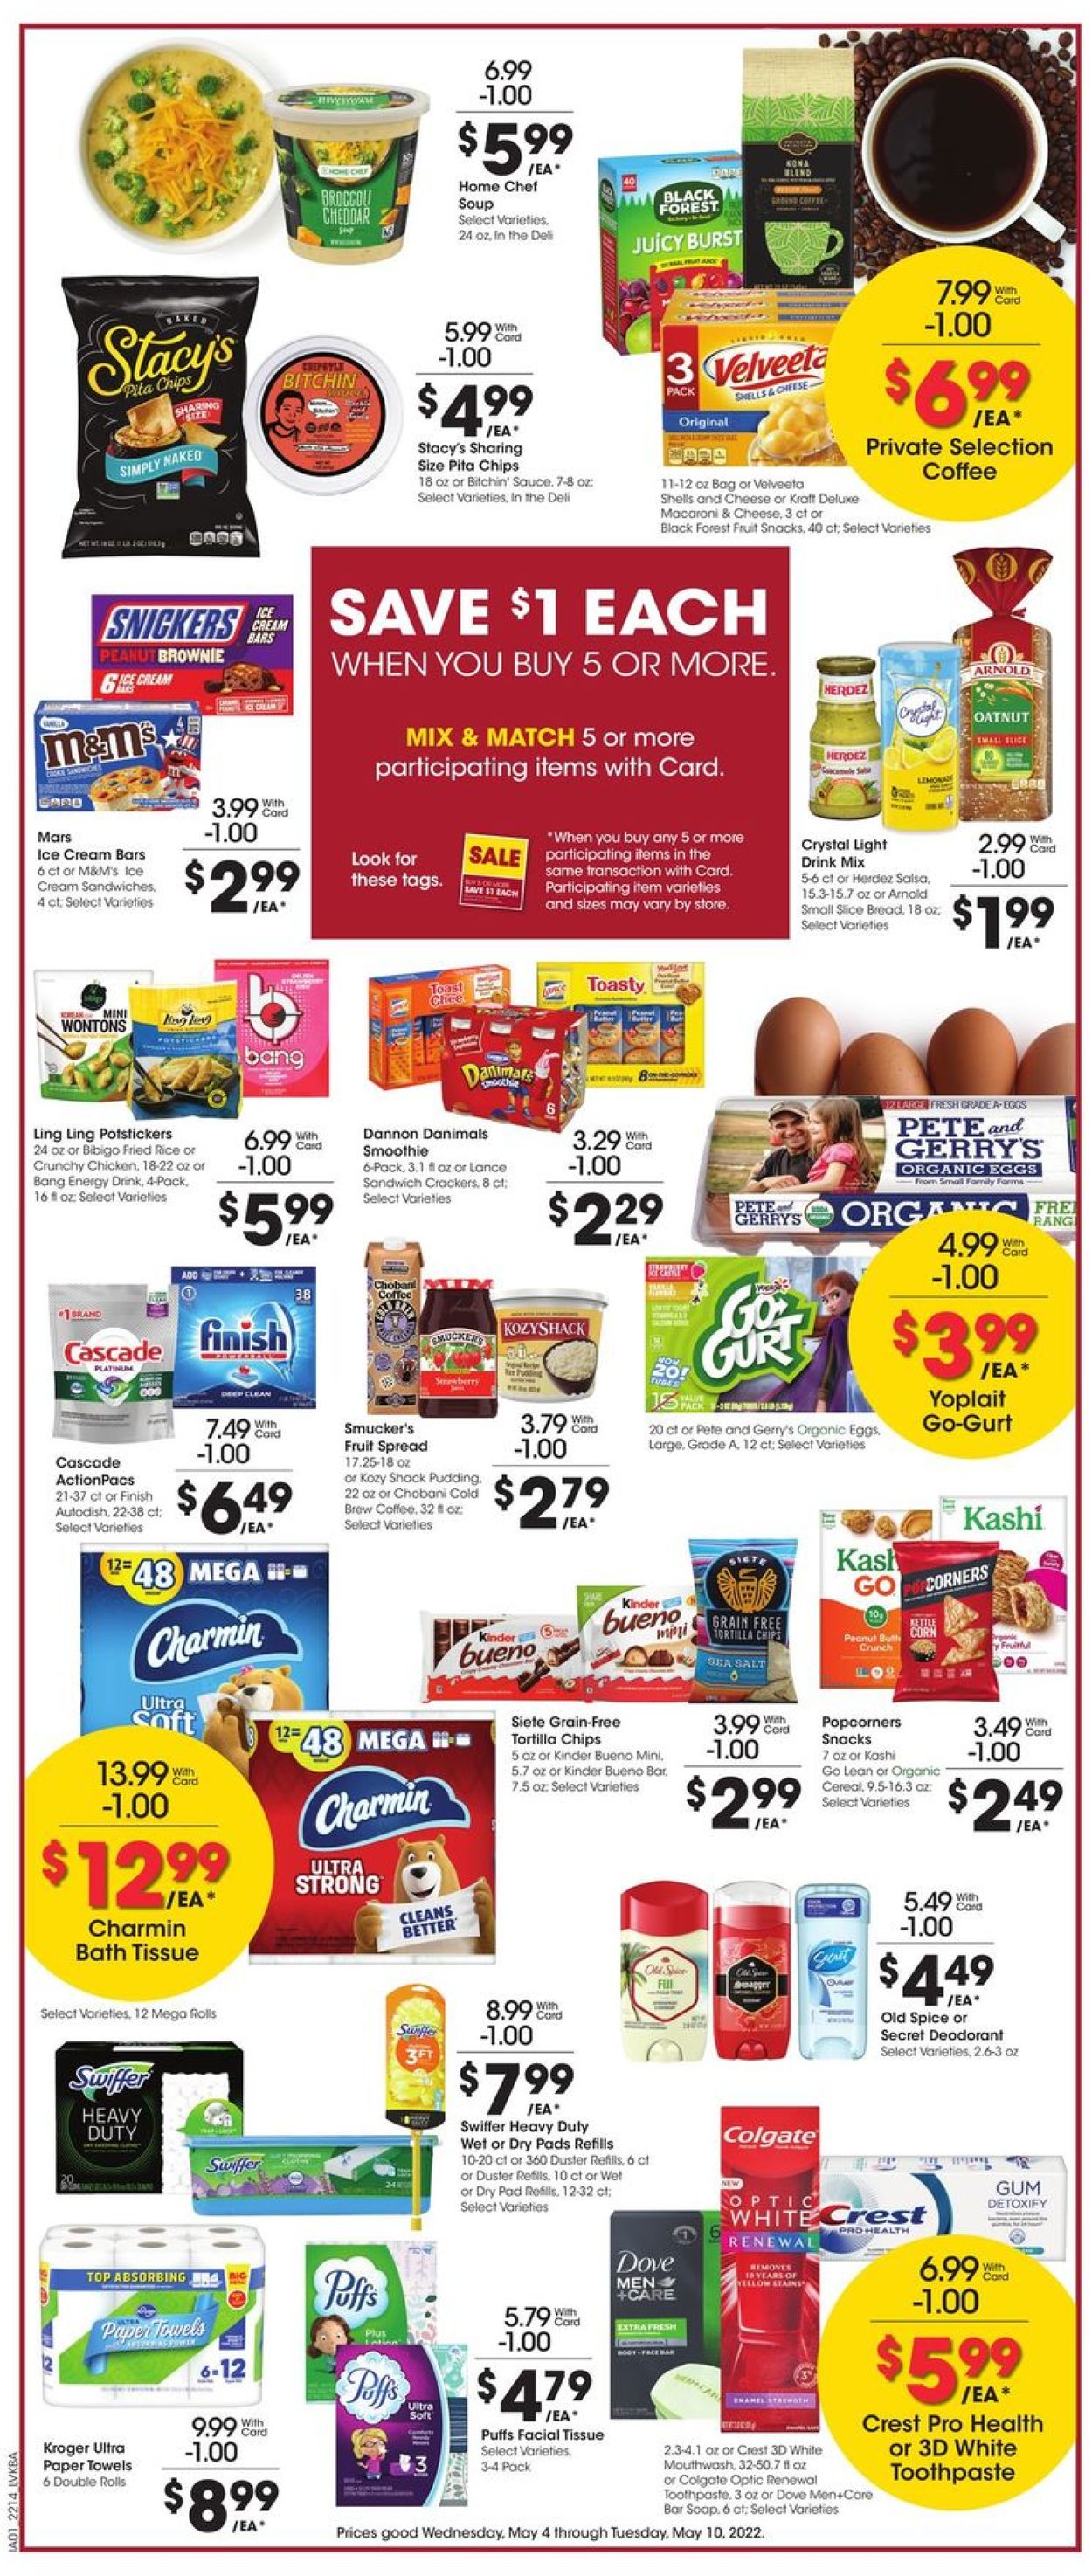 Catalogue Jay C Food Stores from 05/04/2022